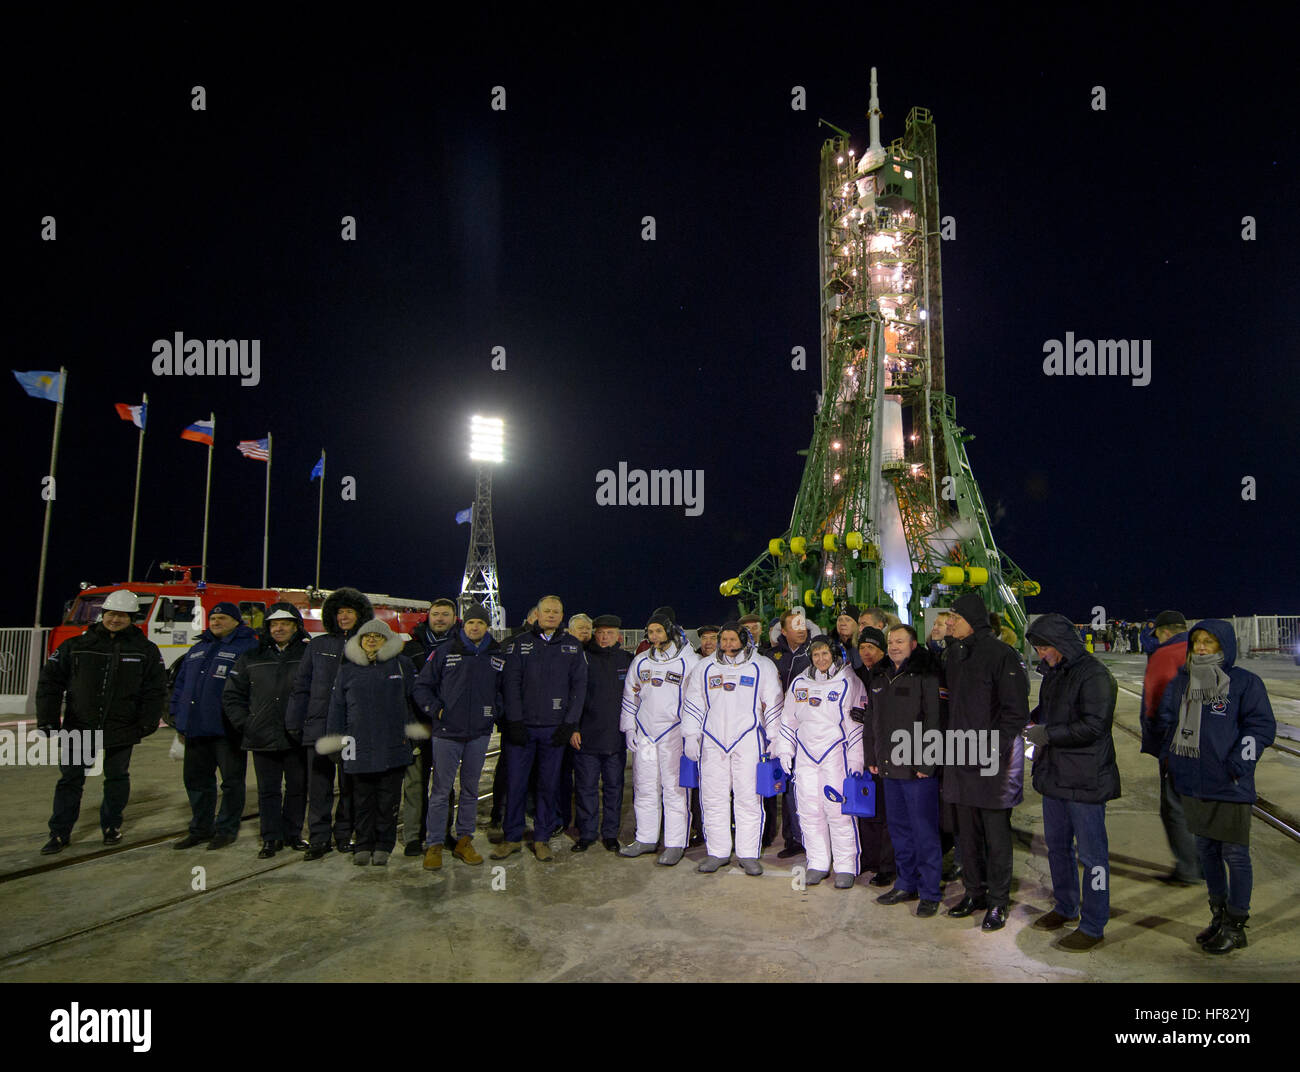 Expedition 50 crewmembers ESA astronaut Thomas Pesquet, left, Russian cosmonaut Oleg Novitskiy of Roscosmos, center, and NASA astronaut Peggy Whitson pose for a group photograph with mission managers in front of the Soyuz rocket at the launch pad, Thursday, Nov. 17, 2016, at the Baikonur Cosmodrome in Kazakhstan. Whitson, Novitskiy, and Pesquet will spend approximately six months on the orbital complex. Stock Photo